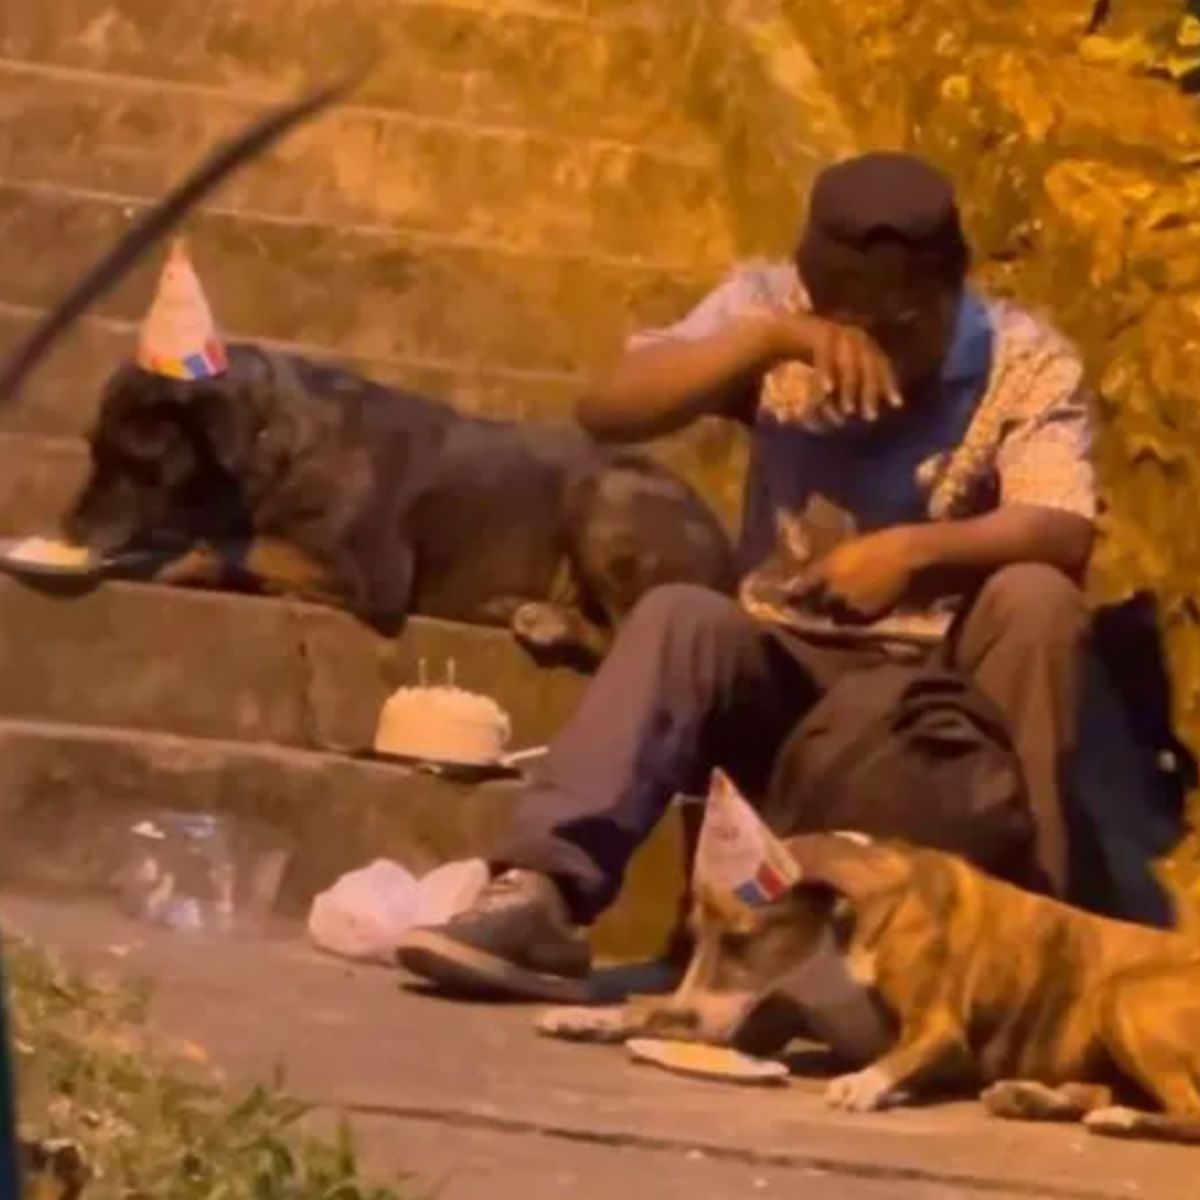 homeless man crying while two dogs are eating 